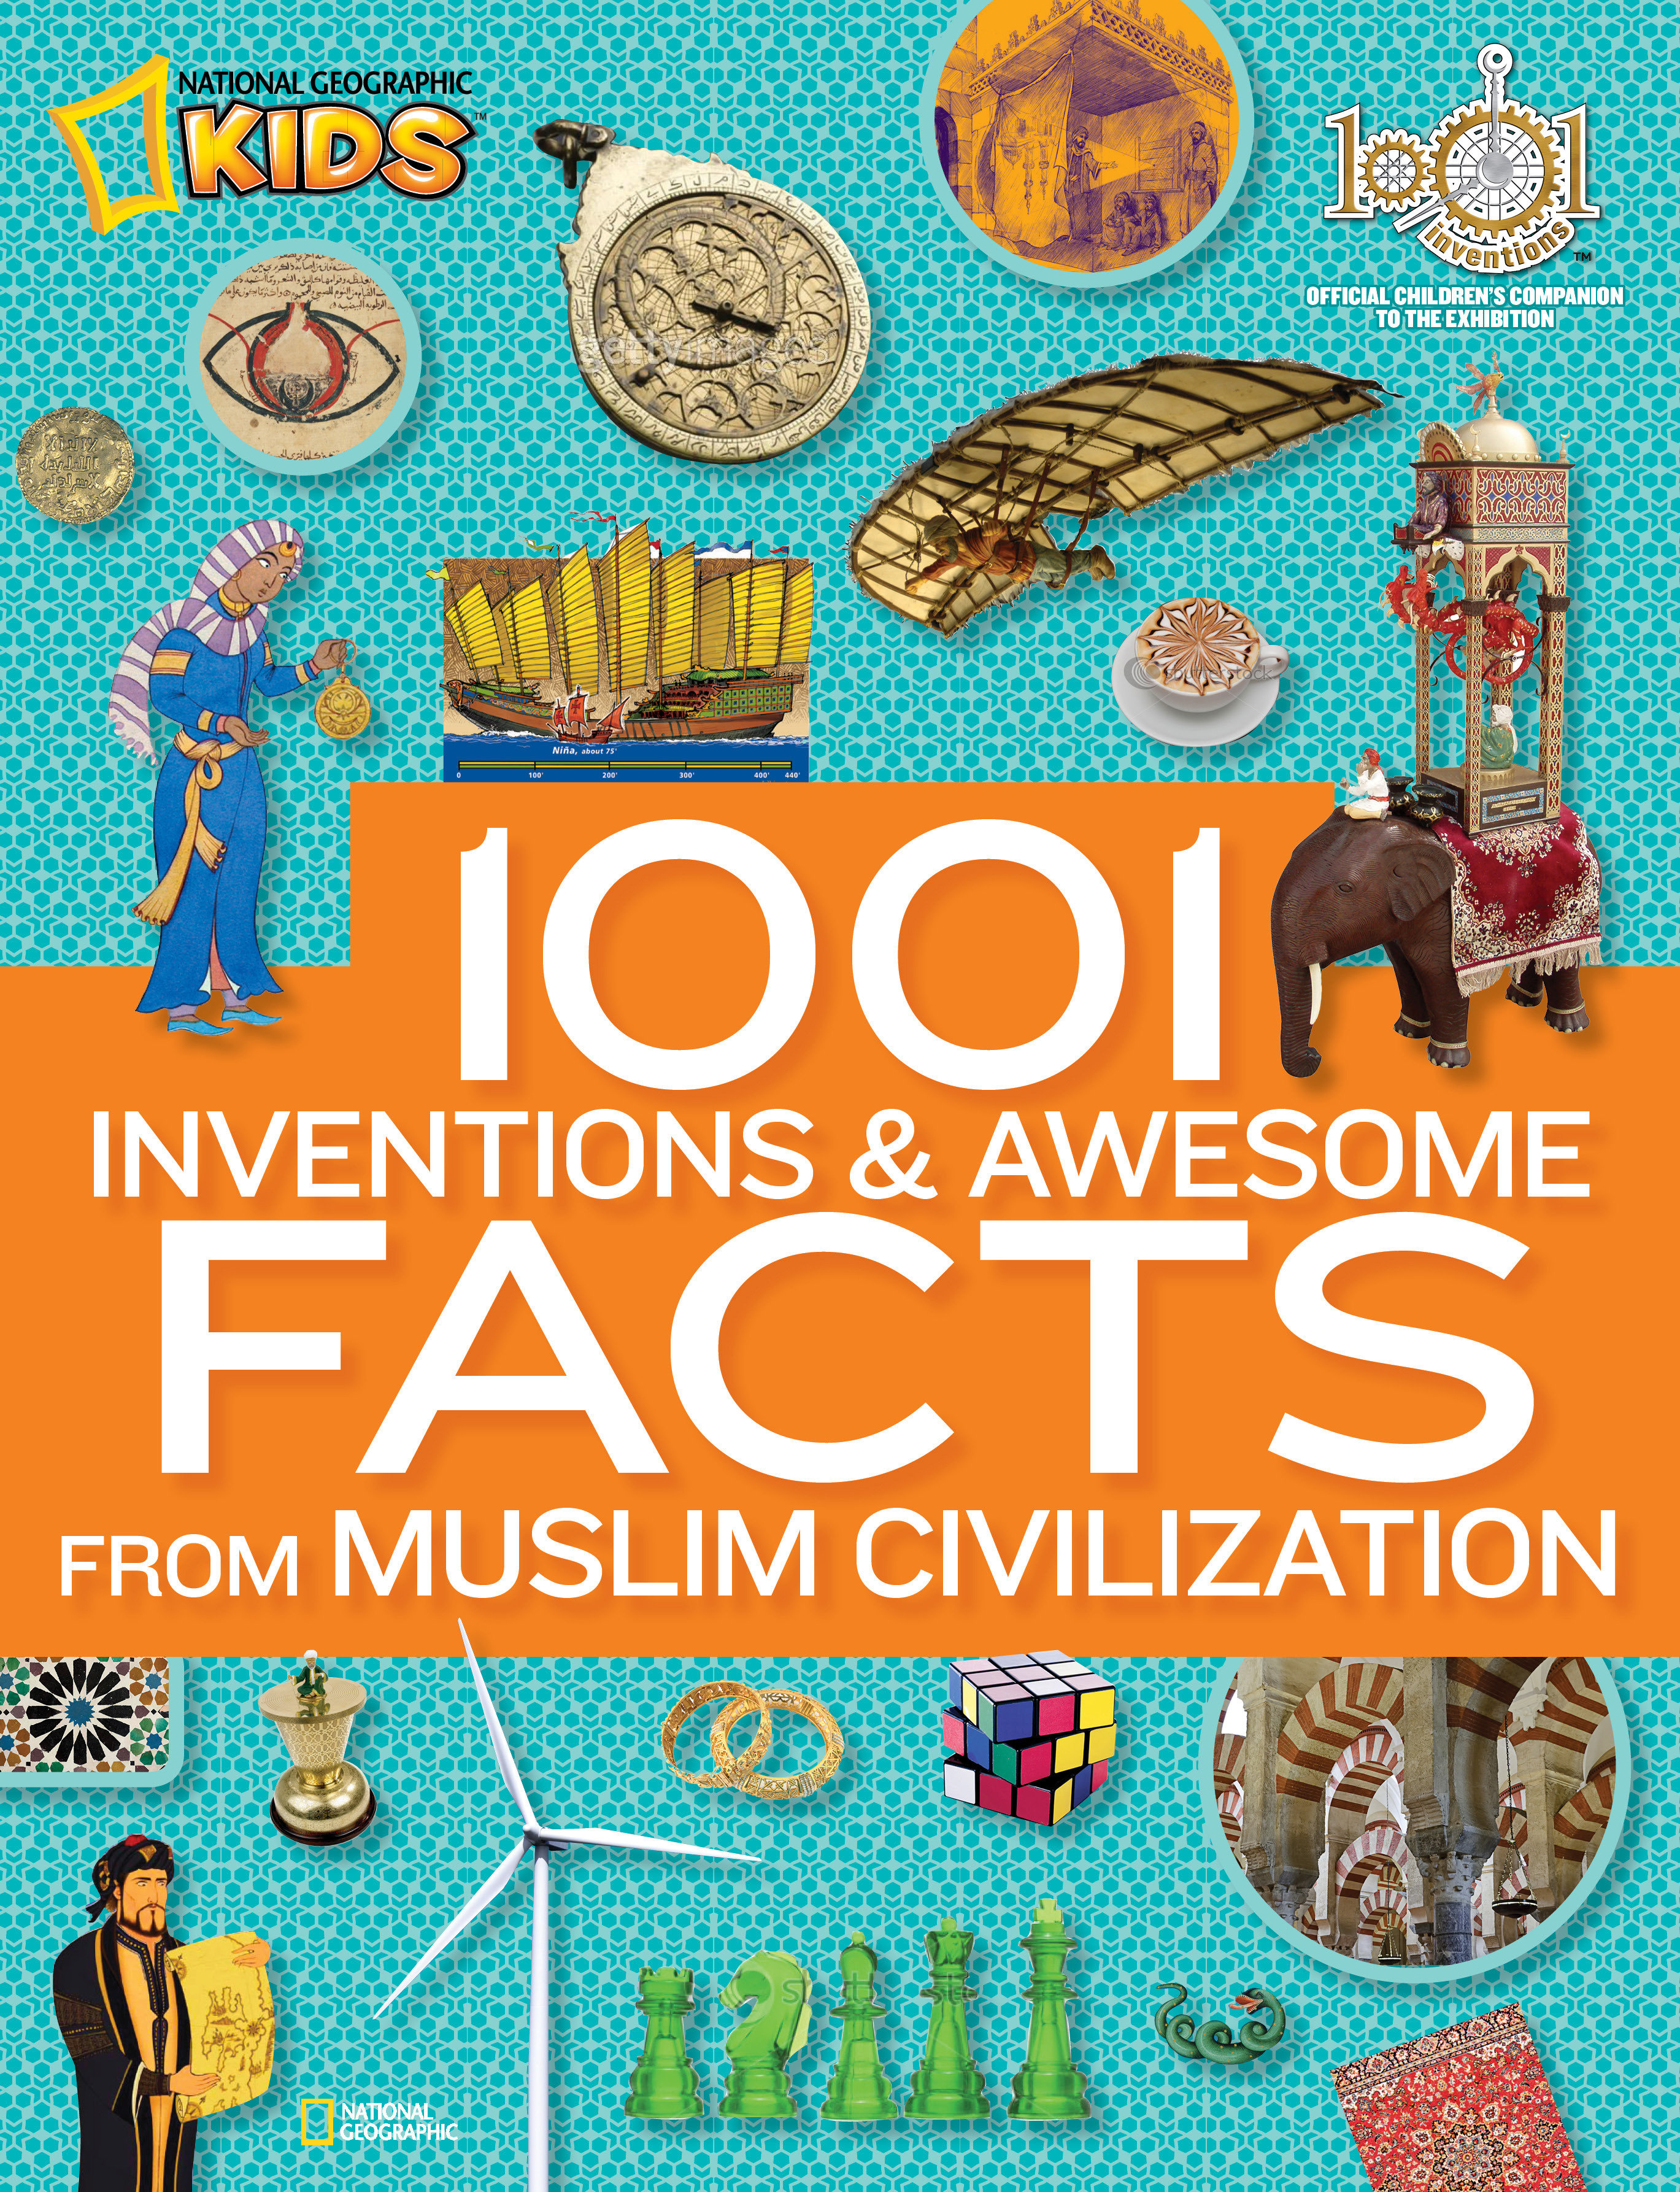 1001 Inventions And Awesome Facts From Muslim Civilization (Hardcover Book)